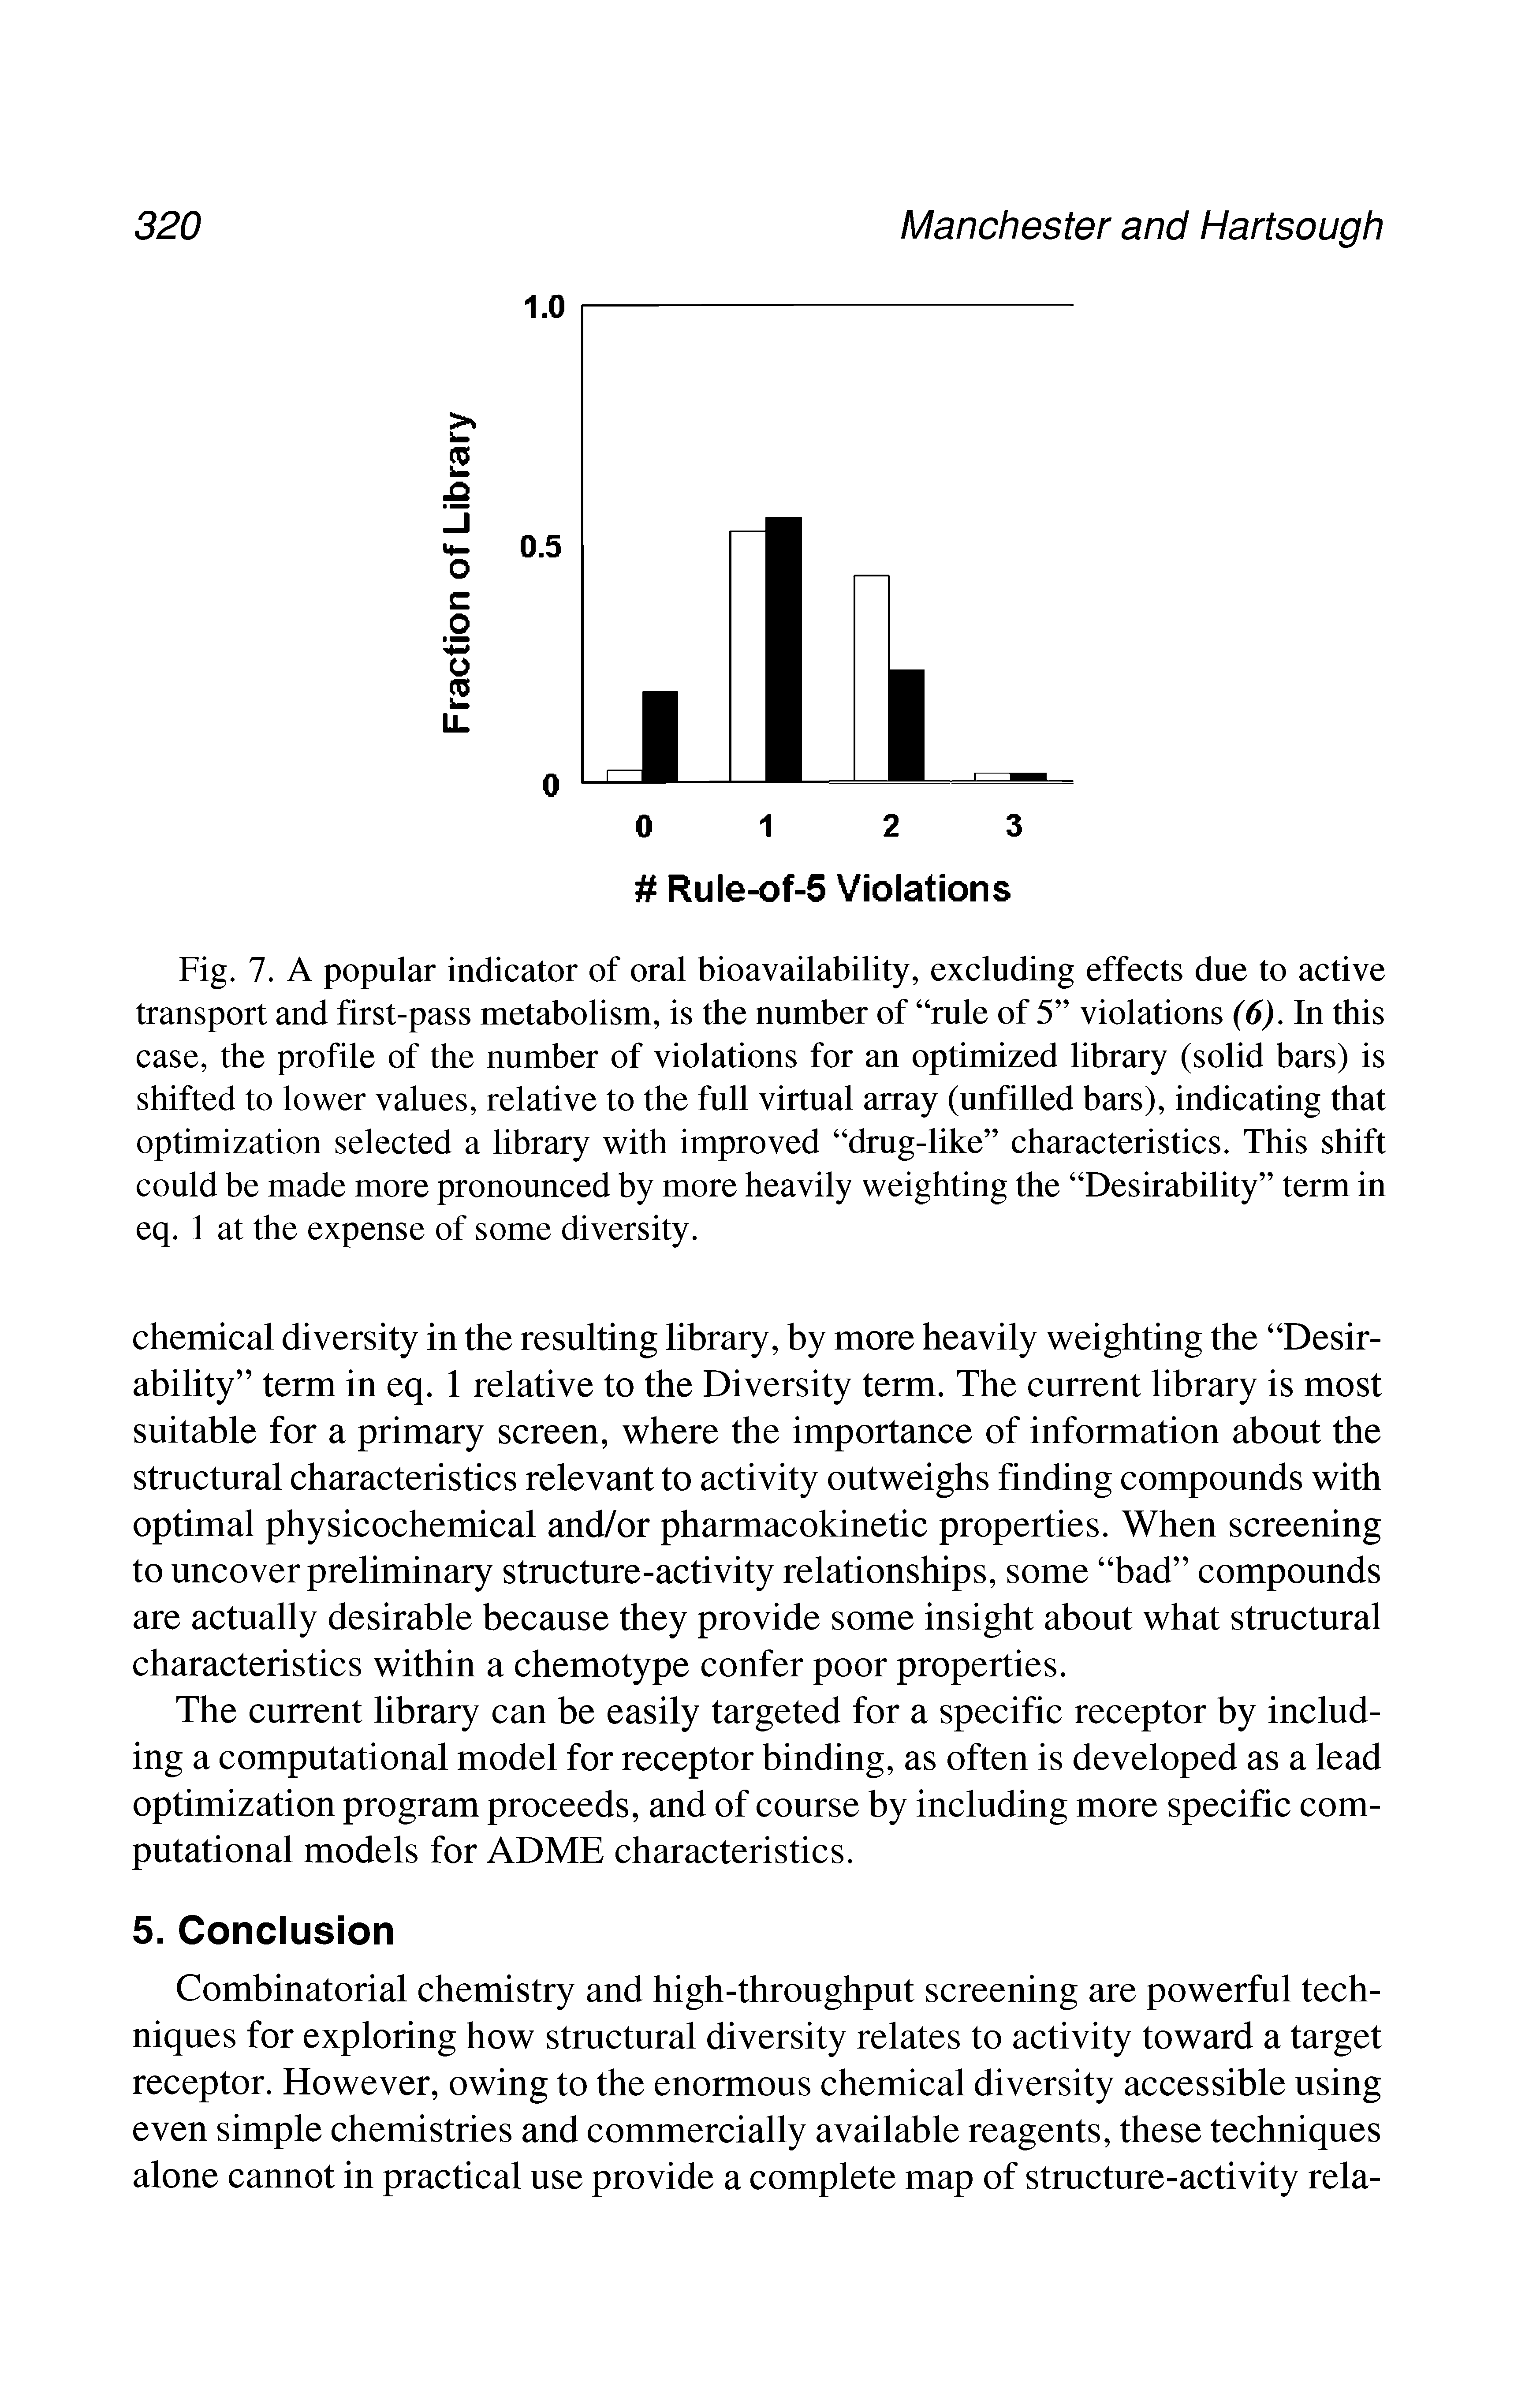 Fig. 7. A popular indicator of oral bioavailability, excluding effects due to active transport and first-pass metabolism, is the number of rule of 5 violations (6). In this case, the profile of the number of violations for an optimized library (solid bars) is shifted to lower values, relative to the full virtual array (unfilled bars), indicating that optimization selected a library with improved drug-like characteristics. This shift could be made more pronounced by more heavily weighting the Desirability term in eq. 1 at the expense of some diversity.